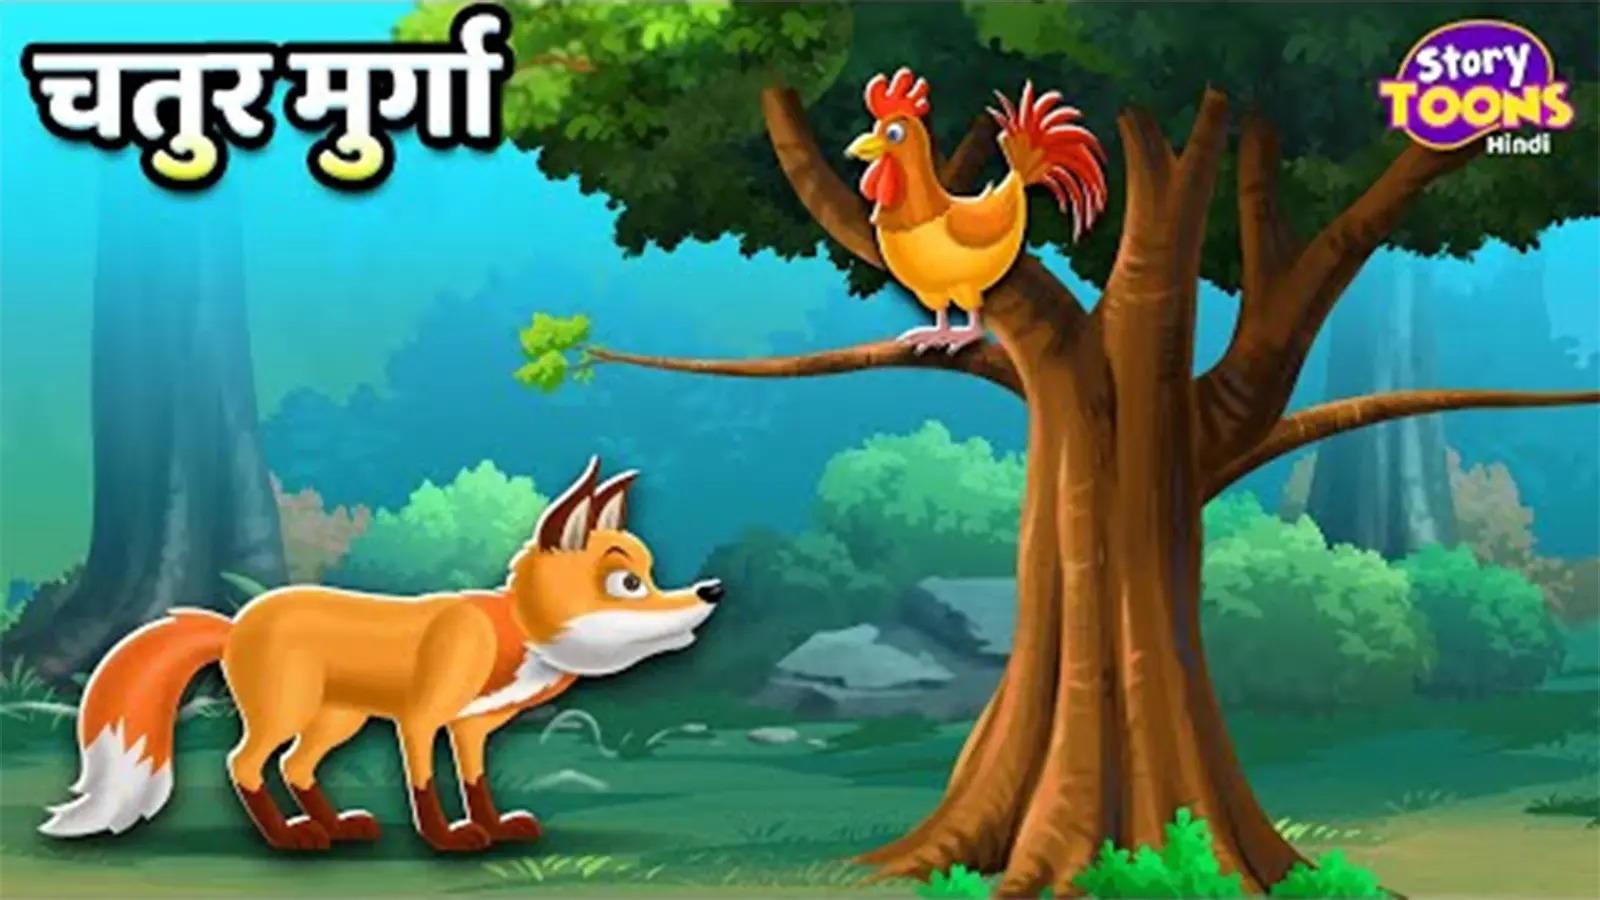 Watch Latest Children Hindi Story 'Clever Rooster' For Kids - Check Out  Kids's Nursery Rhymes And Baby Songs In Hindi | Entertainment - Times of  India Videos